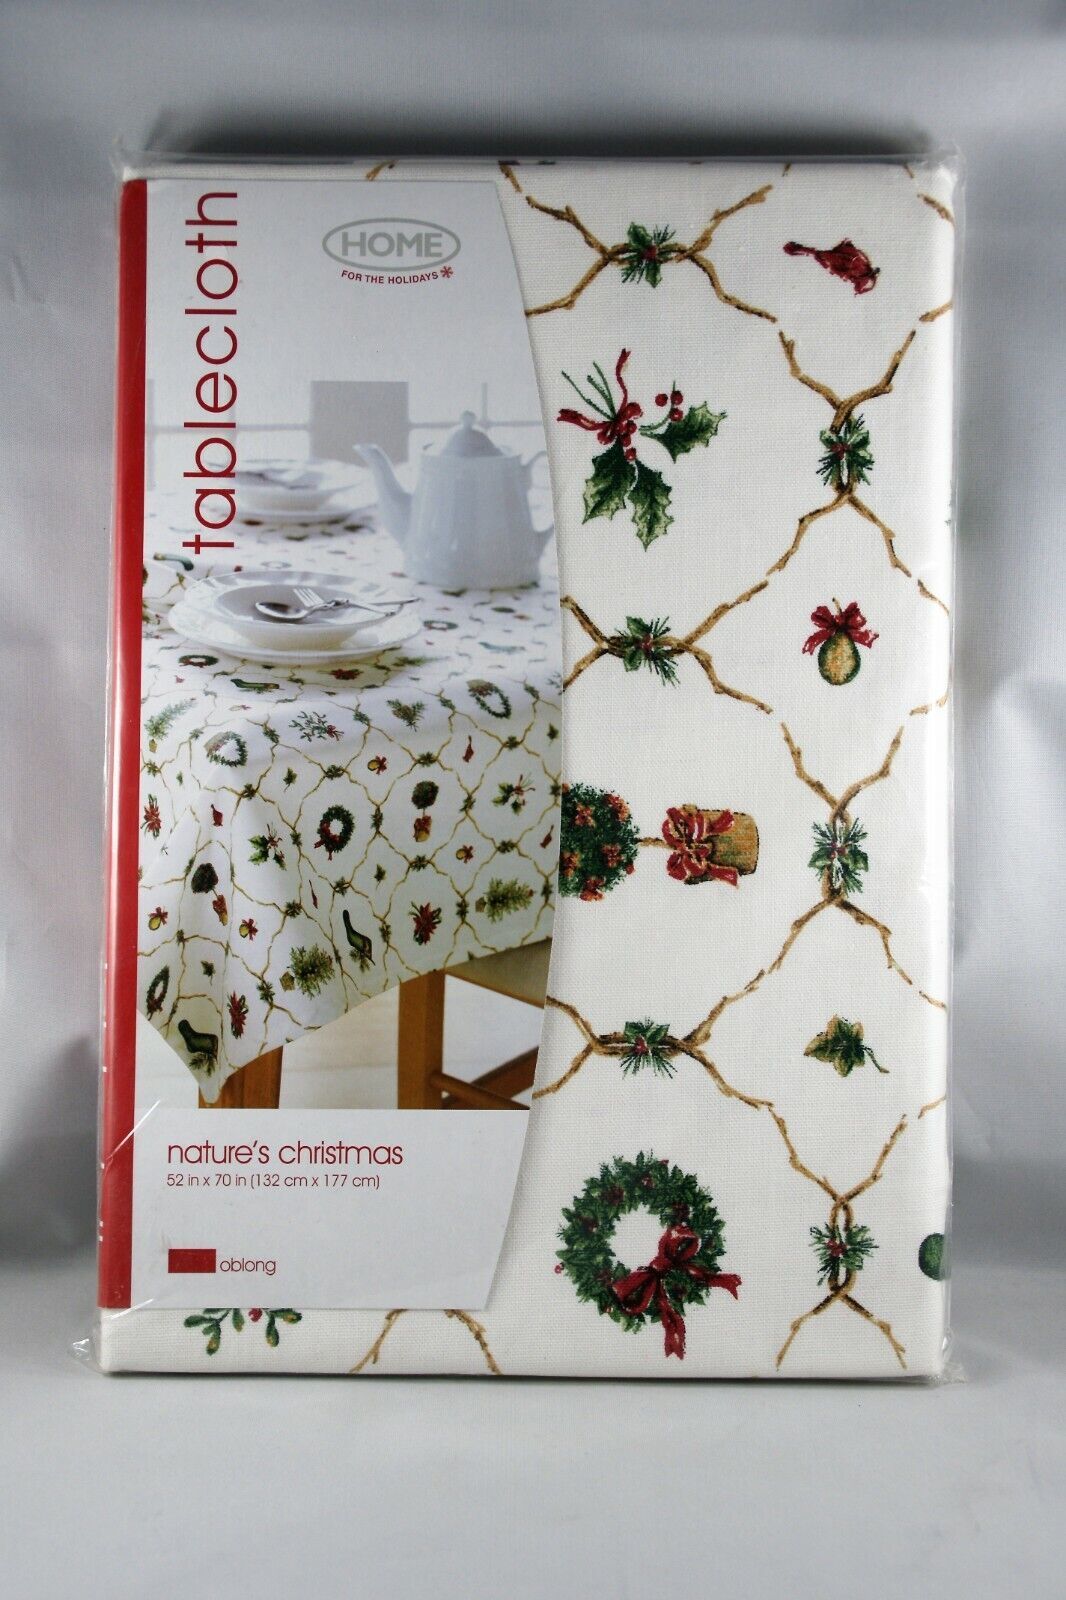 Home For The Holidays Nature's Christmas Tablecloth Oblong Wreath Holly Cotton - $12.18